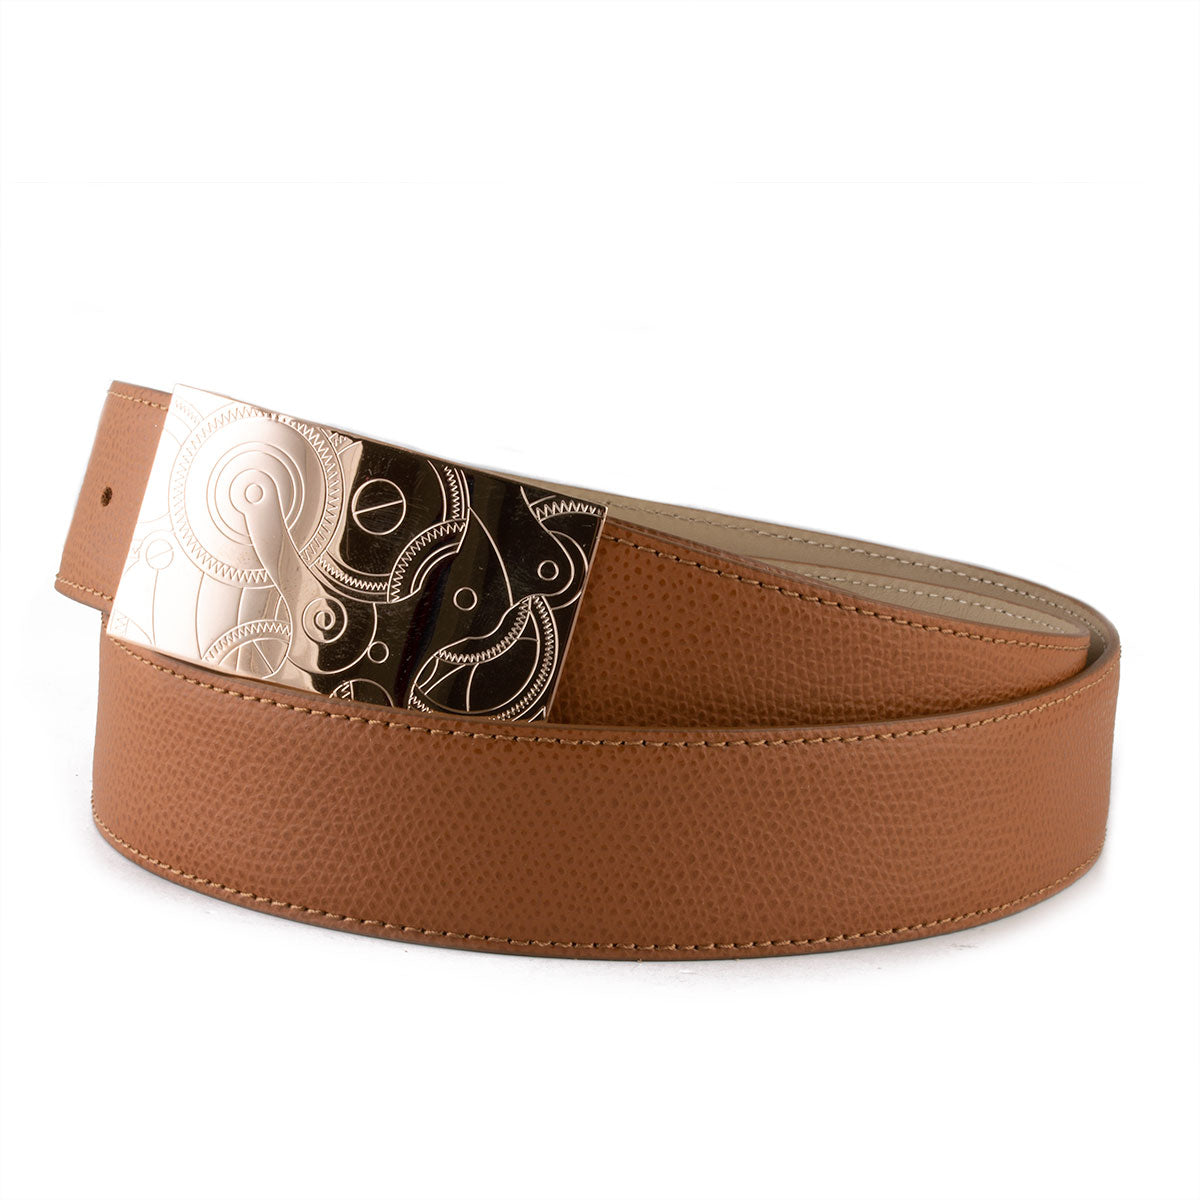 Hermès style leather belt - Grained calf